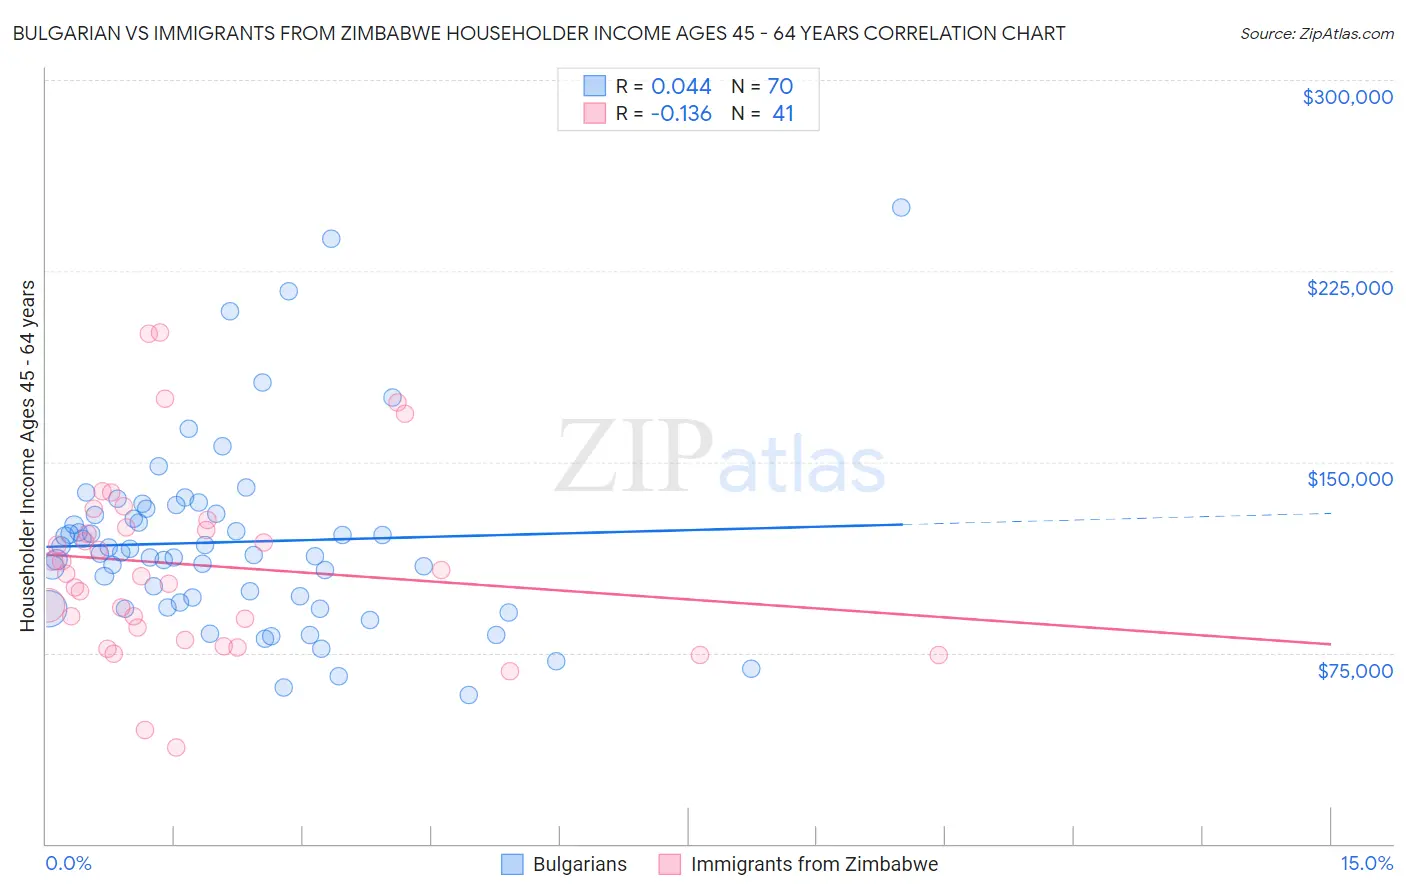 Bulgarian vs Immigrants from Zimbabwe Householder Income Ages 45 - 64 years